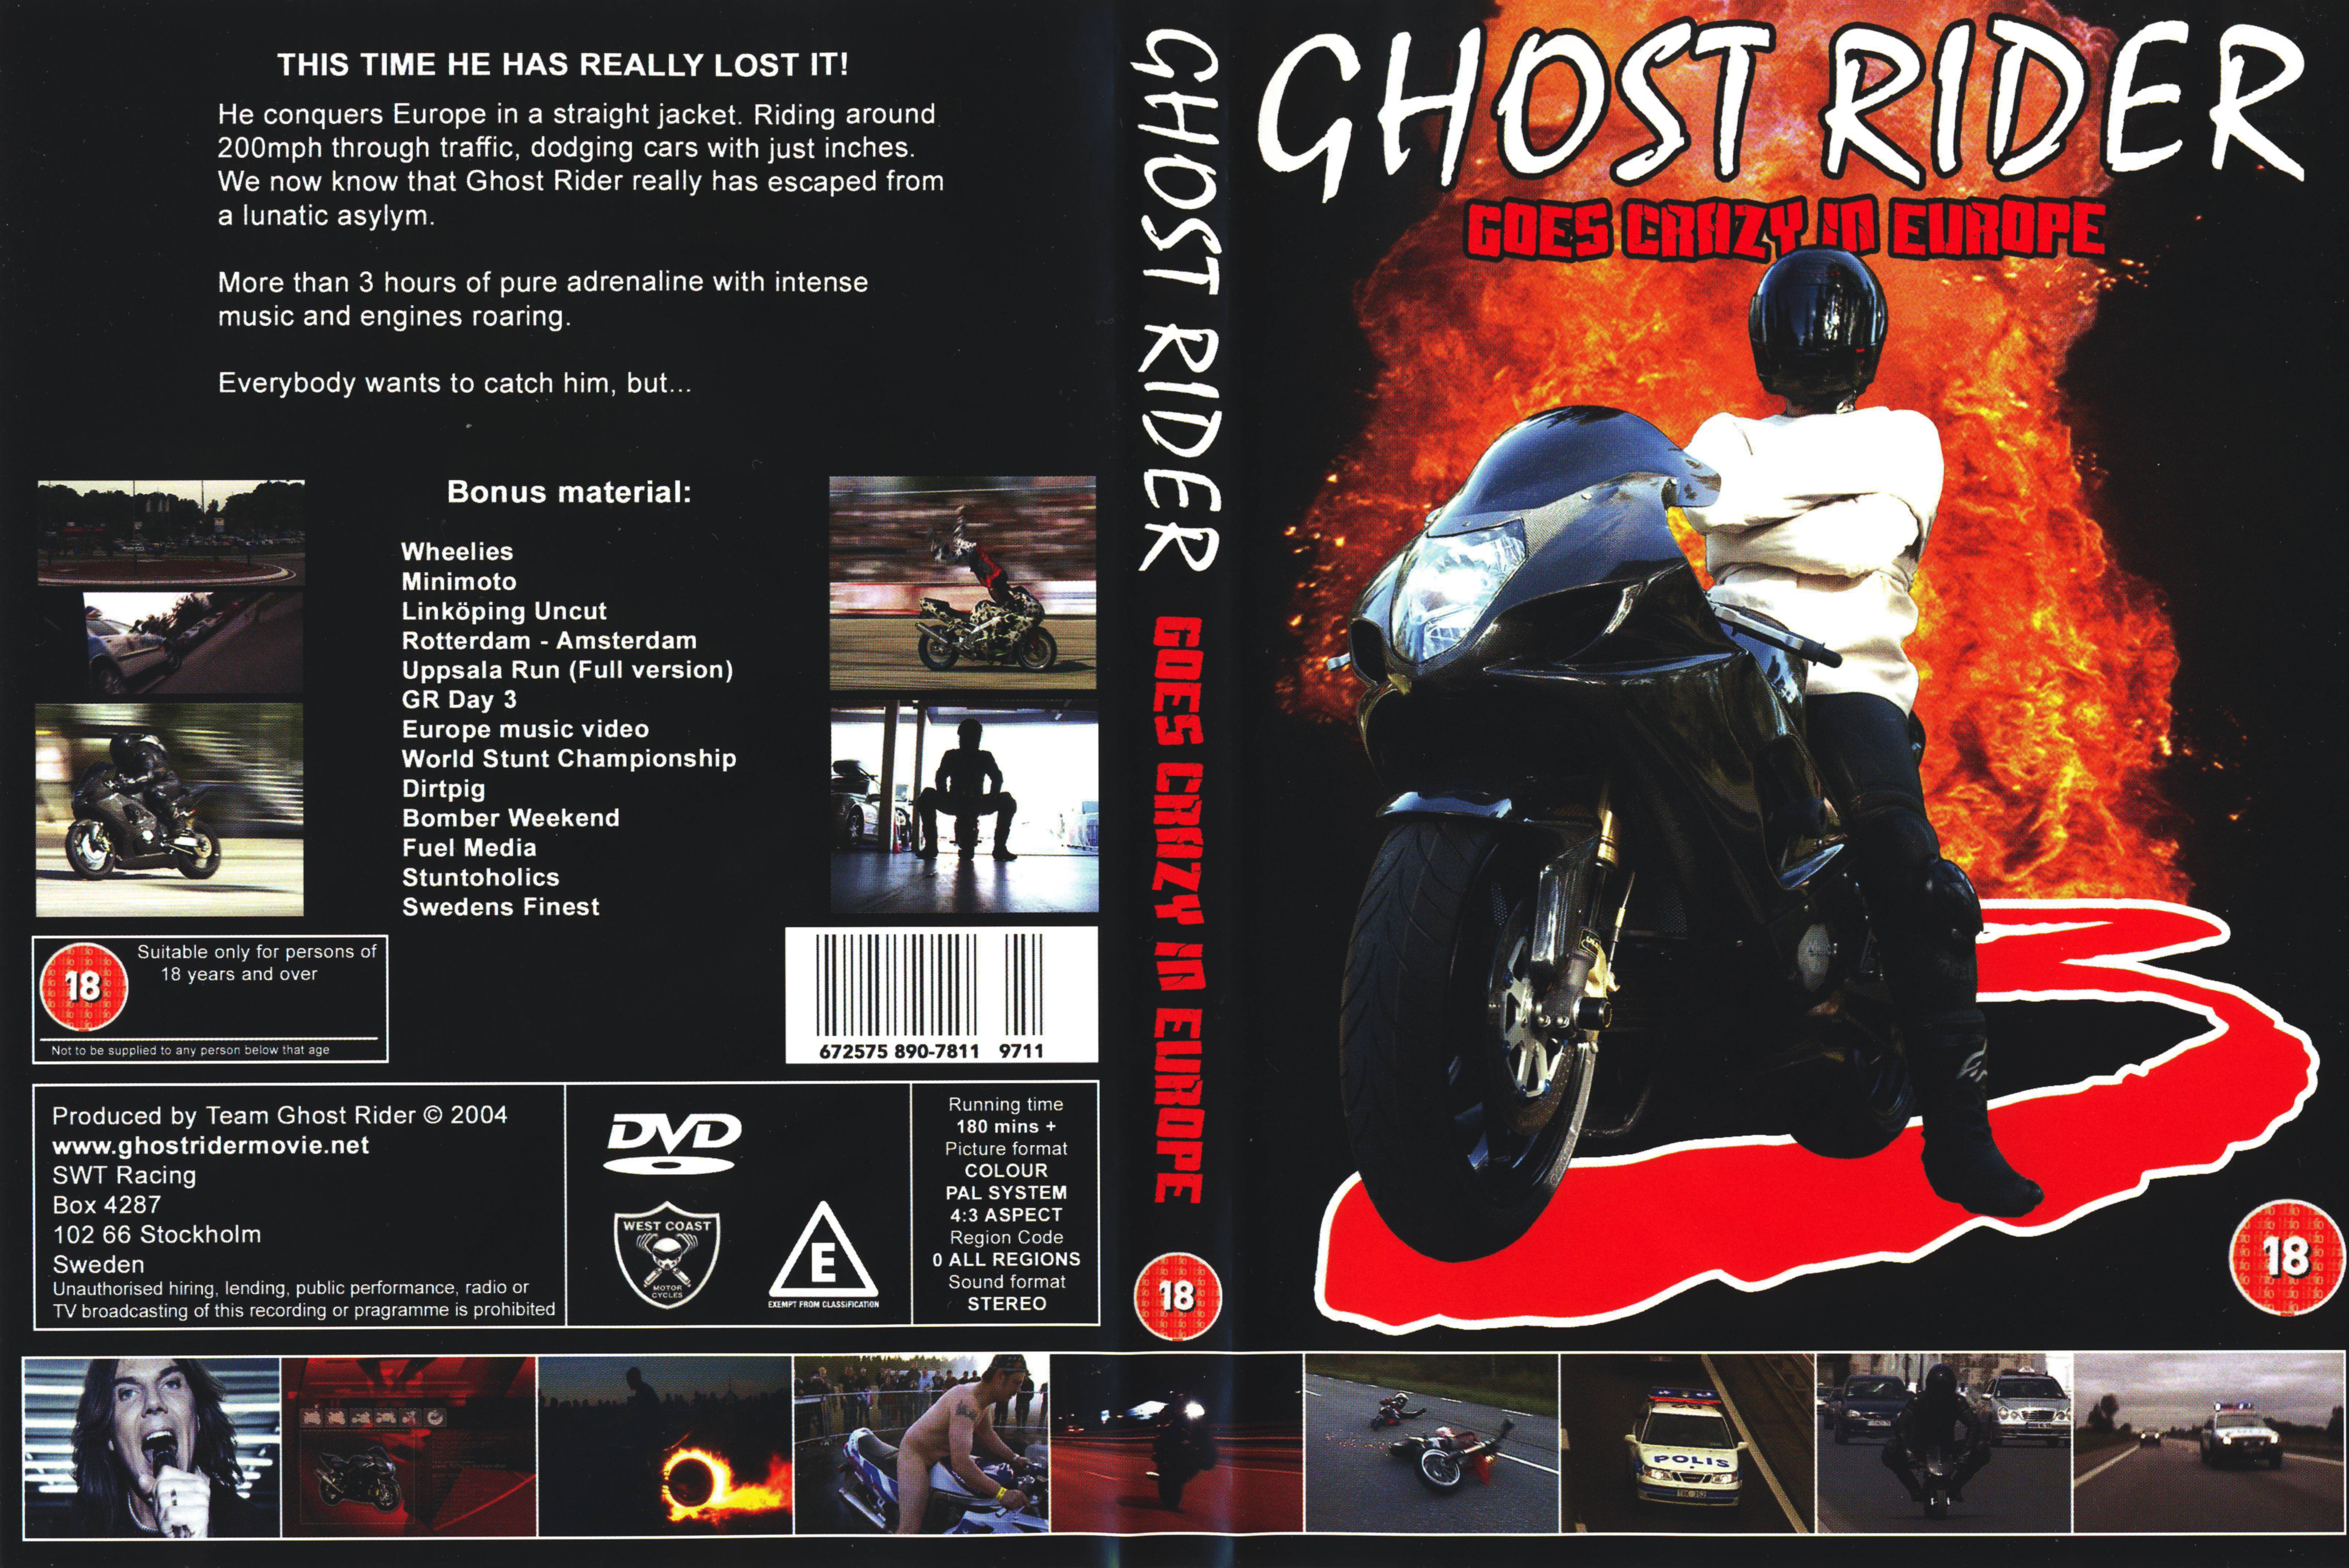 Jaquette DVD Ghost rider 3 Goes crazy in Europe